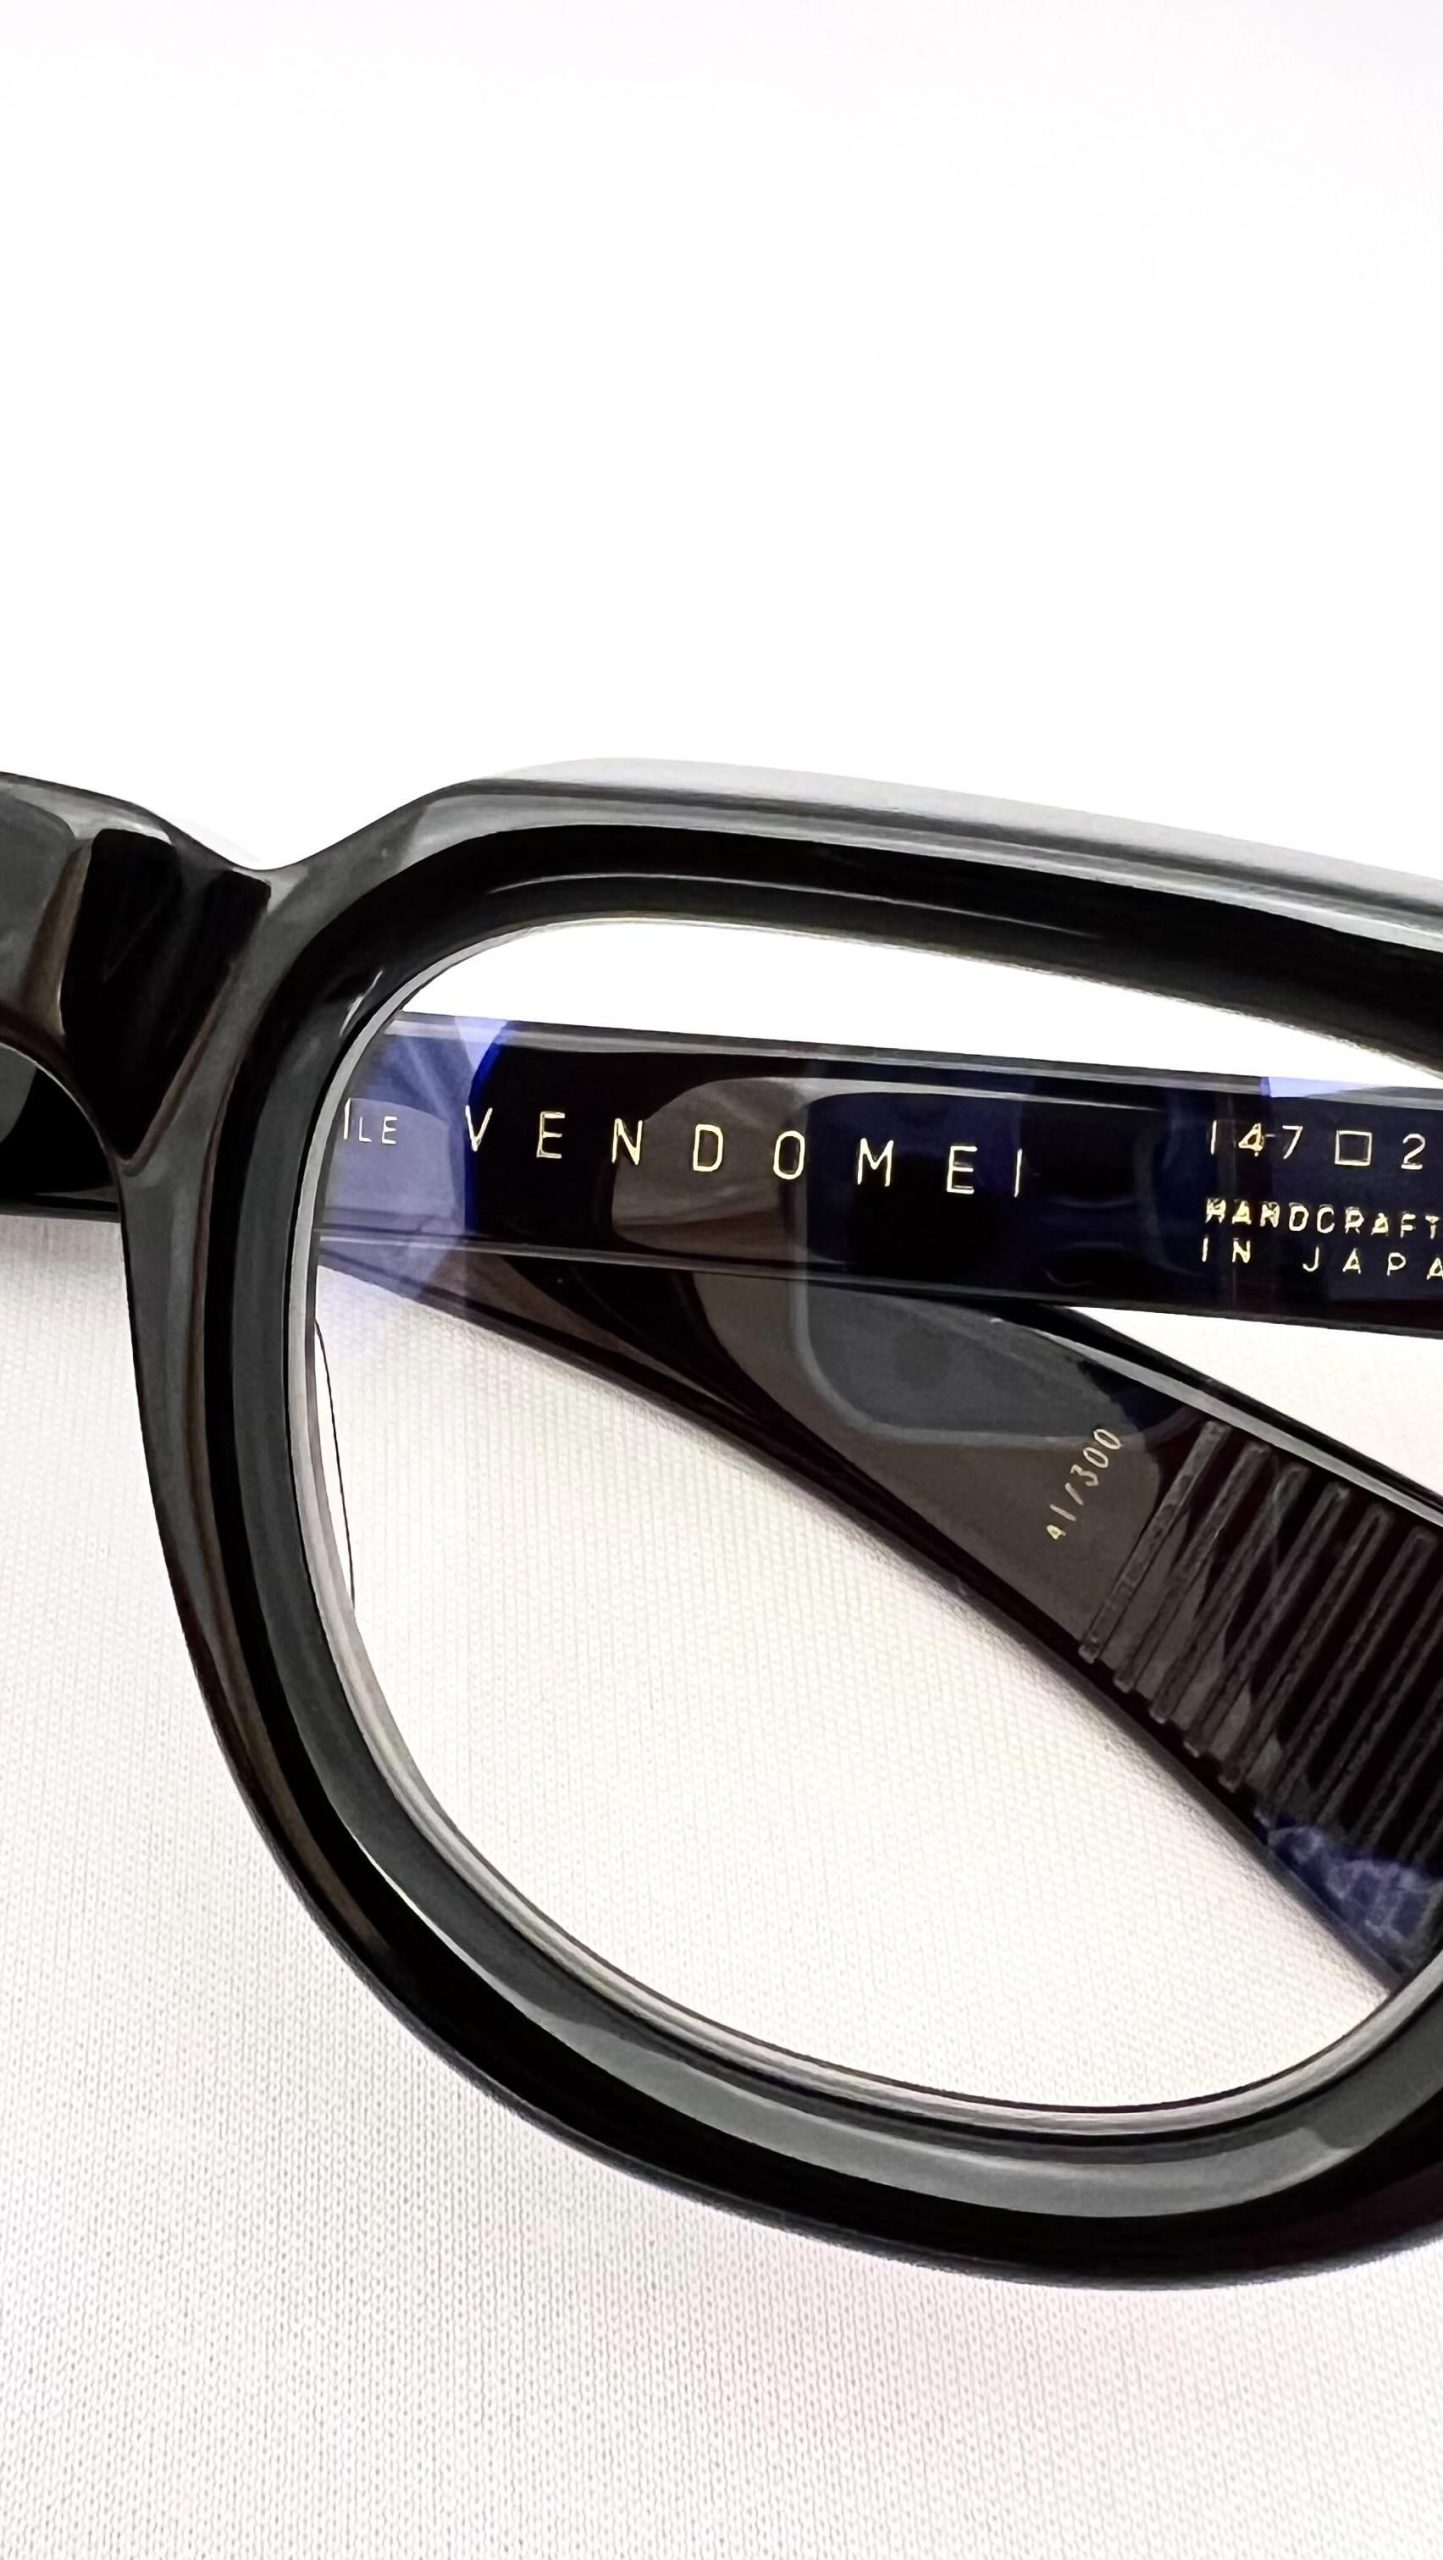 brand: JACQUES MARIE MAGE
mod:VENDOME
col.ECLIPSE2

jacquesmariemageから大人気モデル『VENDOME』の新色が入荷してまいりました！

ECLIPSE2は、jacquesmariemageらしいテンプル外側にゴールドの芯金が見えている仕様です。

横から見た時に華やかさと上品さが目を惹くデザインです。
オプティカル仕様ですが、カラーレンズを入れてお使い頂くことも可能です！

是非店頭にてお試しください！

〜VENDOME〜
パリで愛されたPlace Vendomeは、フランス後期古典主義の洗練された表現を反映したウェリントンシェイプとテンプルに建築的な魅力を加えた1本となっております。

商品に関するお問い合わせはDM、お電話、メールでも受付しておりますのでお気軽に問い合わせください。

︎shop data︎
最寄り駅 自由が丘
正面口出口から歩いて約５分です。
住所 152-0035
東京都目黒区自由が丘1-16-13ヒルズ自由が丘1F
︎03-5731-6612
info＠beauxyeux.jp

New colors of the popular model "VENDOME" from jacquesmariemage are now available!

ECLIPSE2 has a gold core visible on the outside of the temple, which is typical of jacquesmariemage.

The design is eye-catching with its elegance and elegance when viewed from the side.
Although it is an optical specification, you can also use it with colored lenses!

Please try it in store!

〜VENDOME〜
Place Vendome, beloved in Paris, has a Wellington shape and temples that reflect the sophisticated expression of late French classicism, adding architectural charm.

For inquiries regarding products, please feel free to contact us by DM, phone, or email.

︎ shop information︎
SHOP beauxyeux Jiyugaoka
ZIPCODE 152-0035
1F Hills Jiyugaoka 1-16-13
Jiyugaoka Meguro-ku Tokyo JAPAN
︎+81-35731-6612
info@beauxyeux.jp

#jacquesmariemage　      #眼鏡店　
@beauxyeux_azabu
@beauxyeux_jiyugaoka 
@jacquesmariemage 
@jacquesmariemage_japan